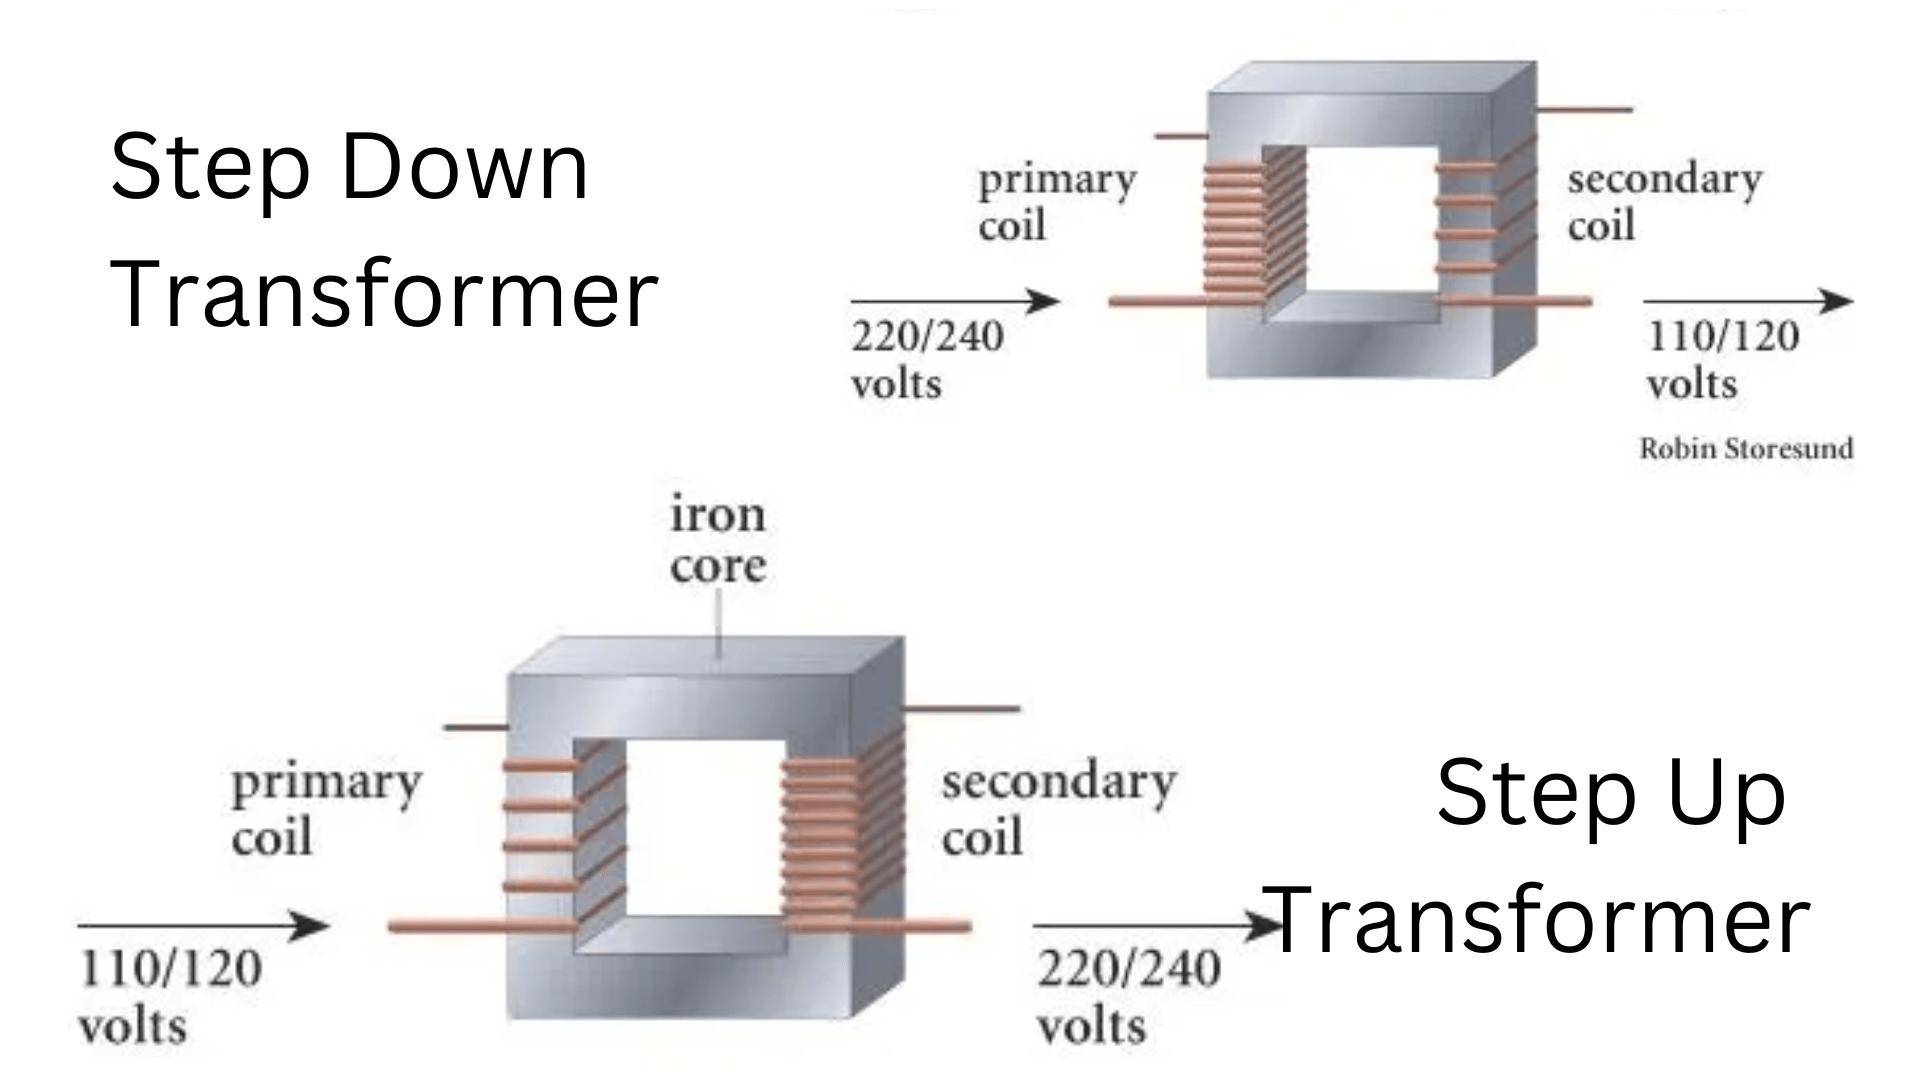 Step up vs Step down transformers: Find out the key differences